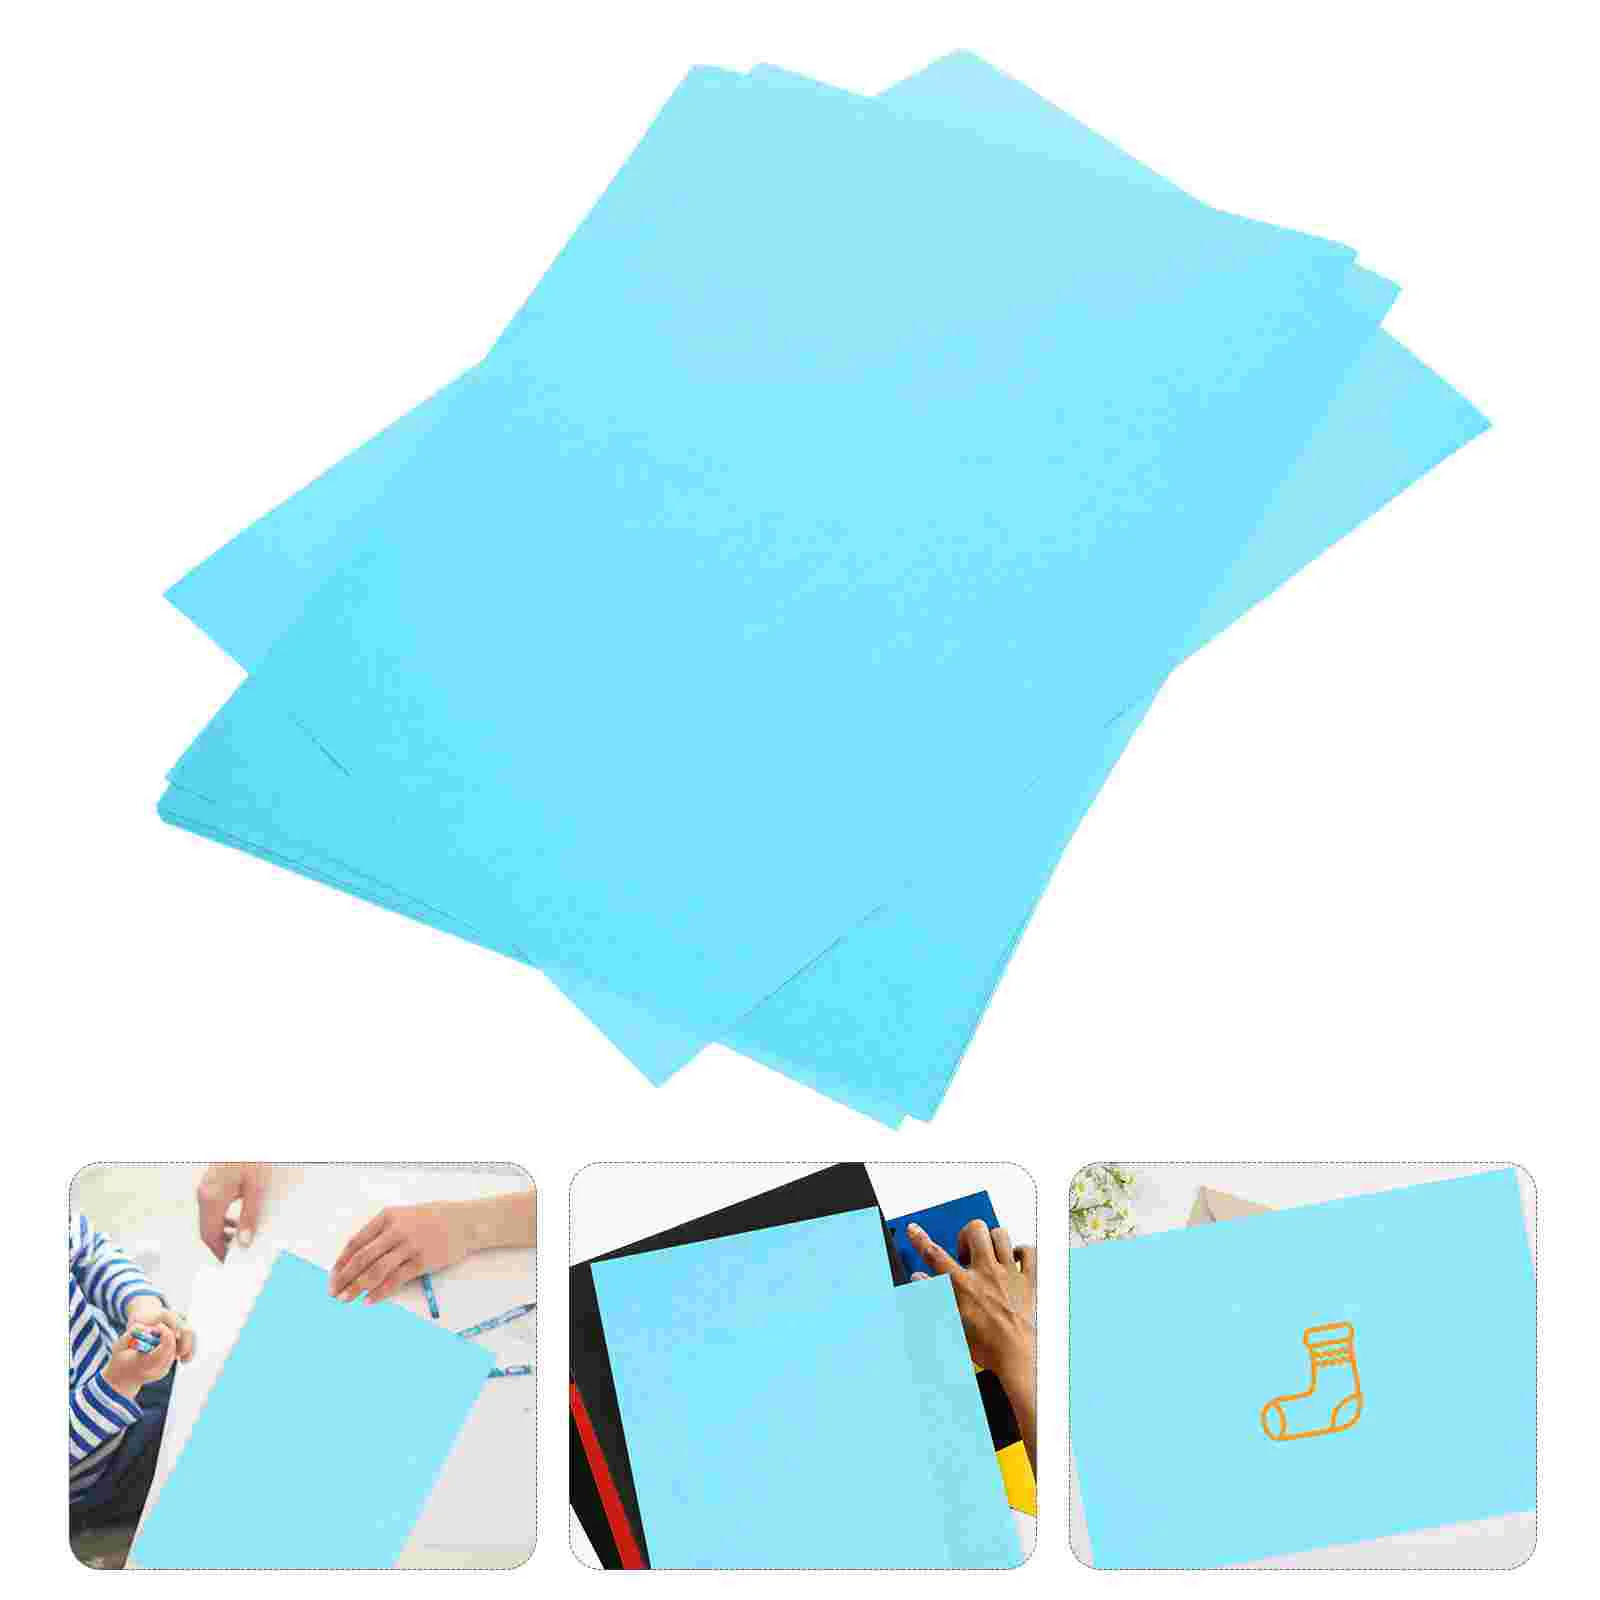 

Multi-use Printer Paper Multi-function DIY Blank A4 Printing for Crafts Thick Printers